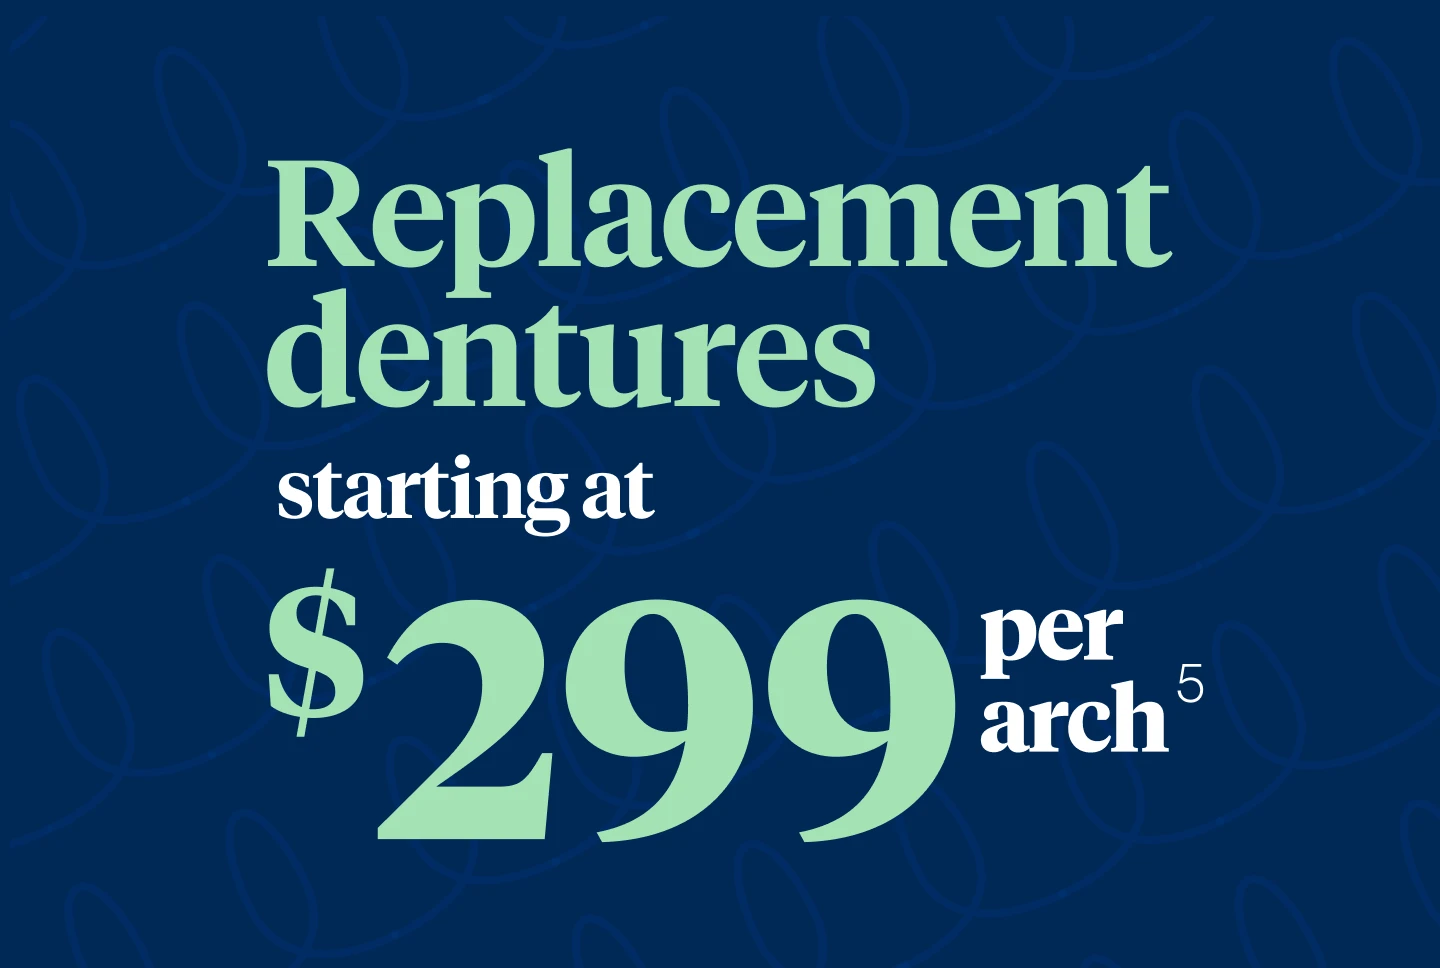 Replacement dentures starting at $299 per  arch.